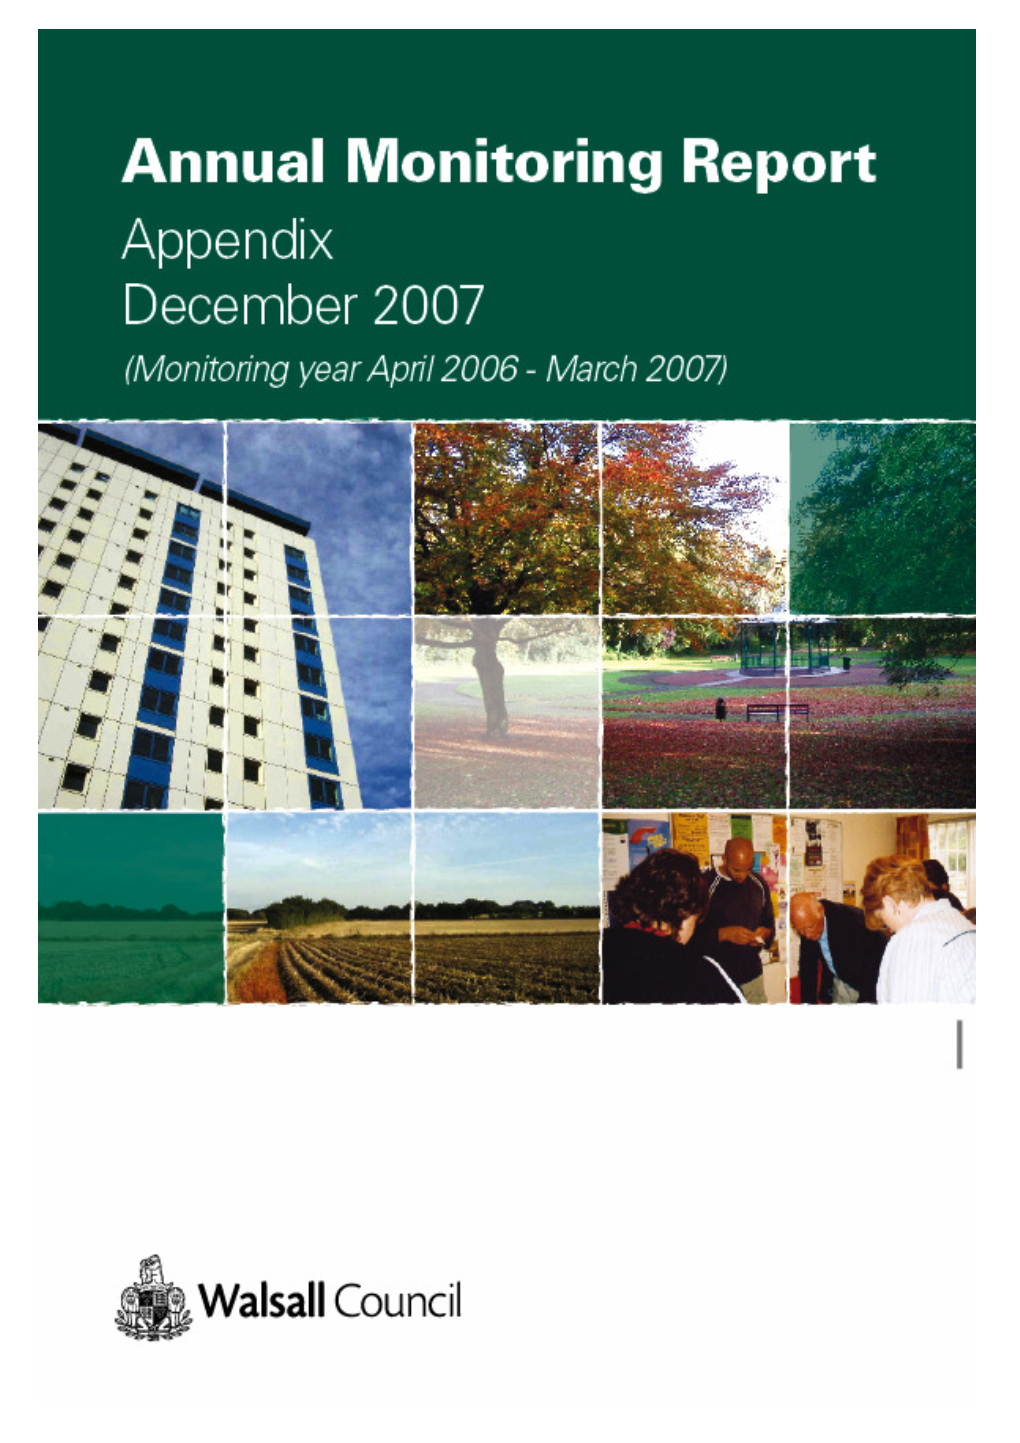 Walsall Council Annual Monitoring Report 2007